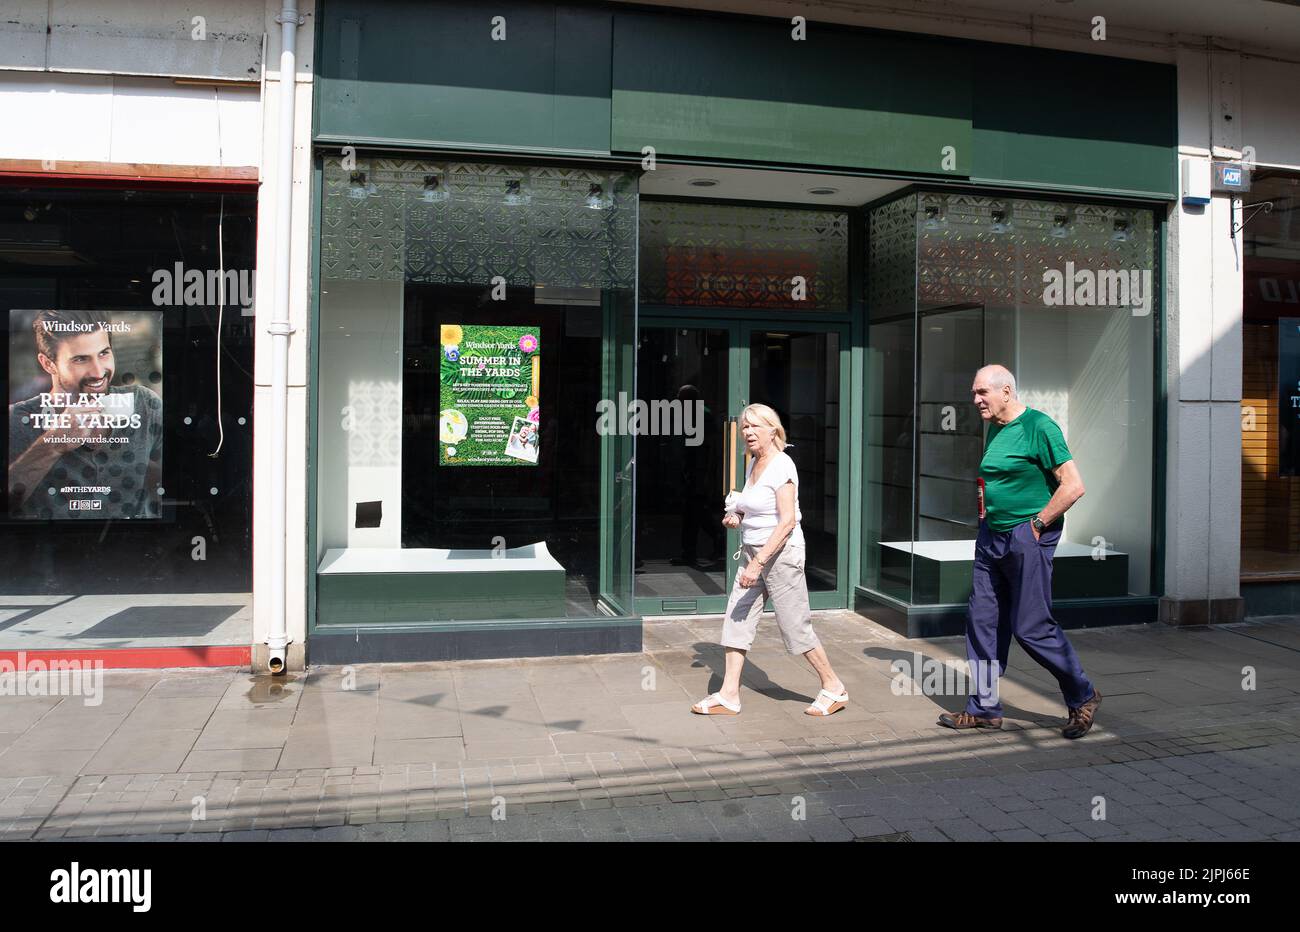 Windsor, Berkshire, UK. 18th August, 2022. The Clarks Shoe Shop in the Windsor Yards shopping centre has now closed down leaving more empty retail units in the town. Credit: Maureen McLean/Alamy Stock Photo